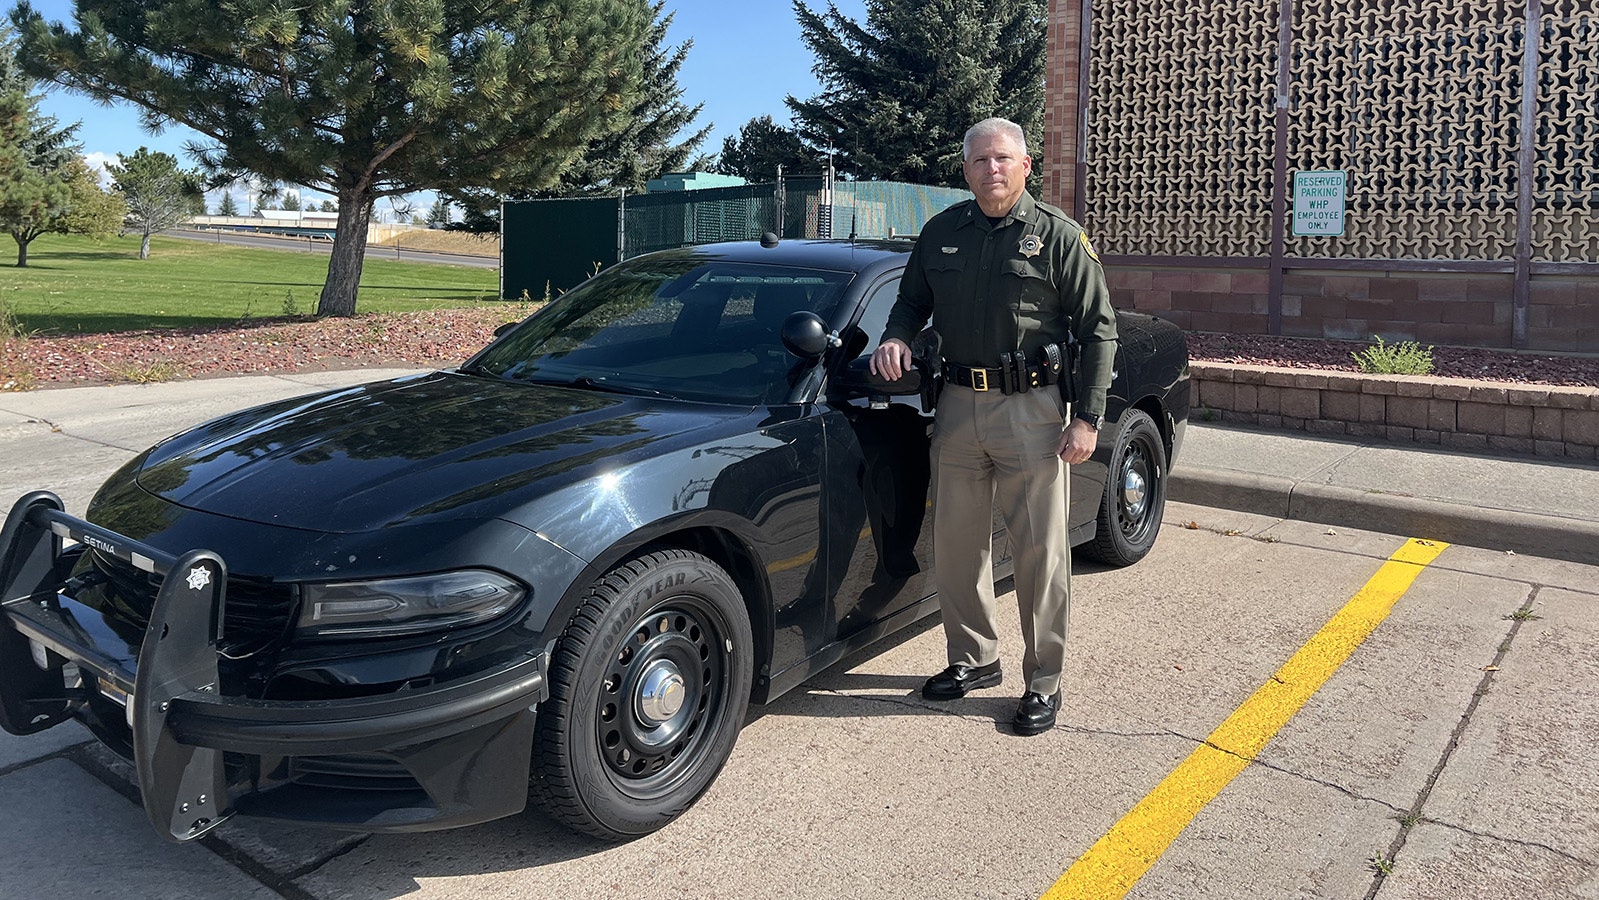 Col. Tim Cameron has been leading the Wyoming Highway Patrol since January.